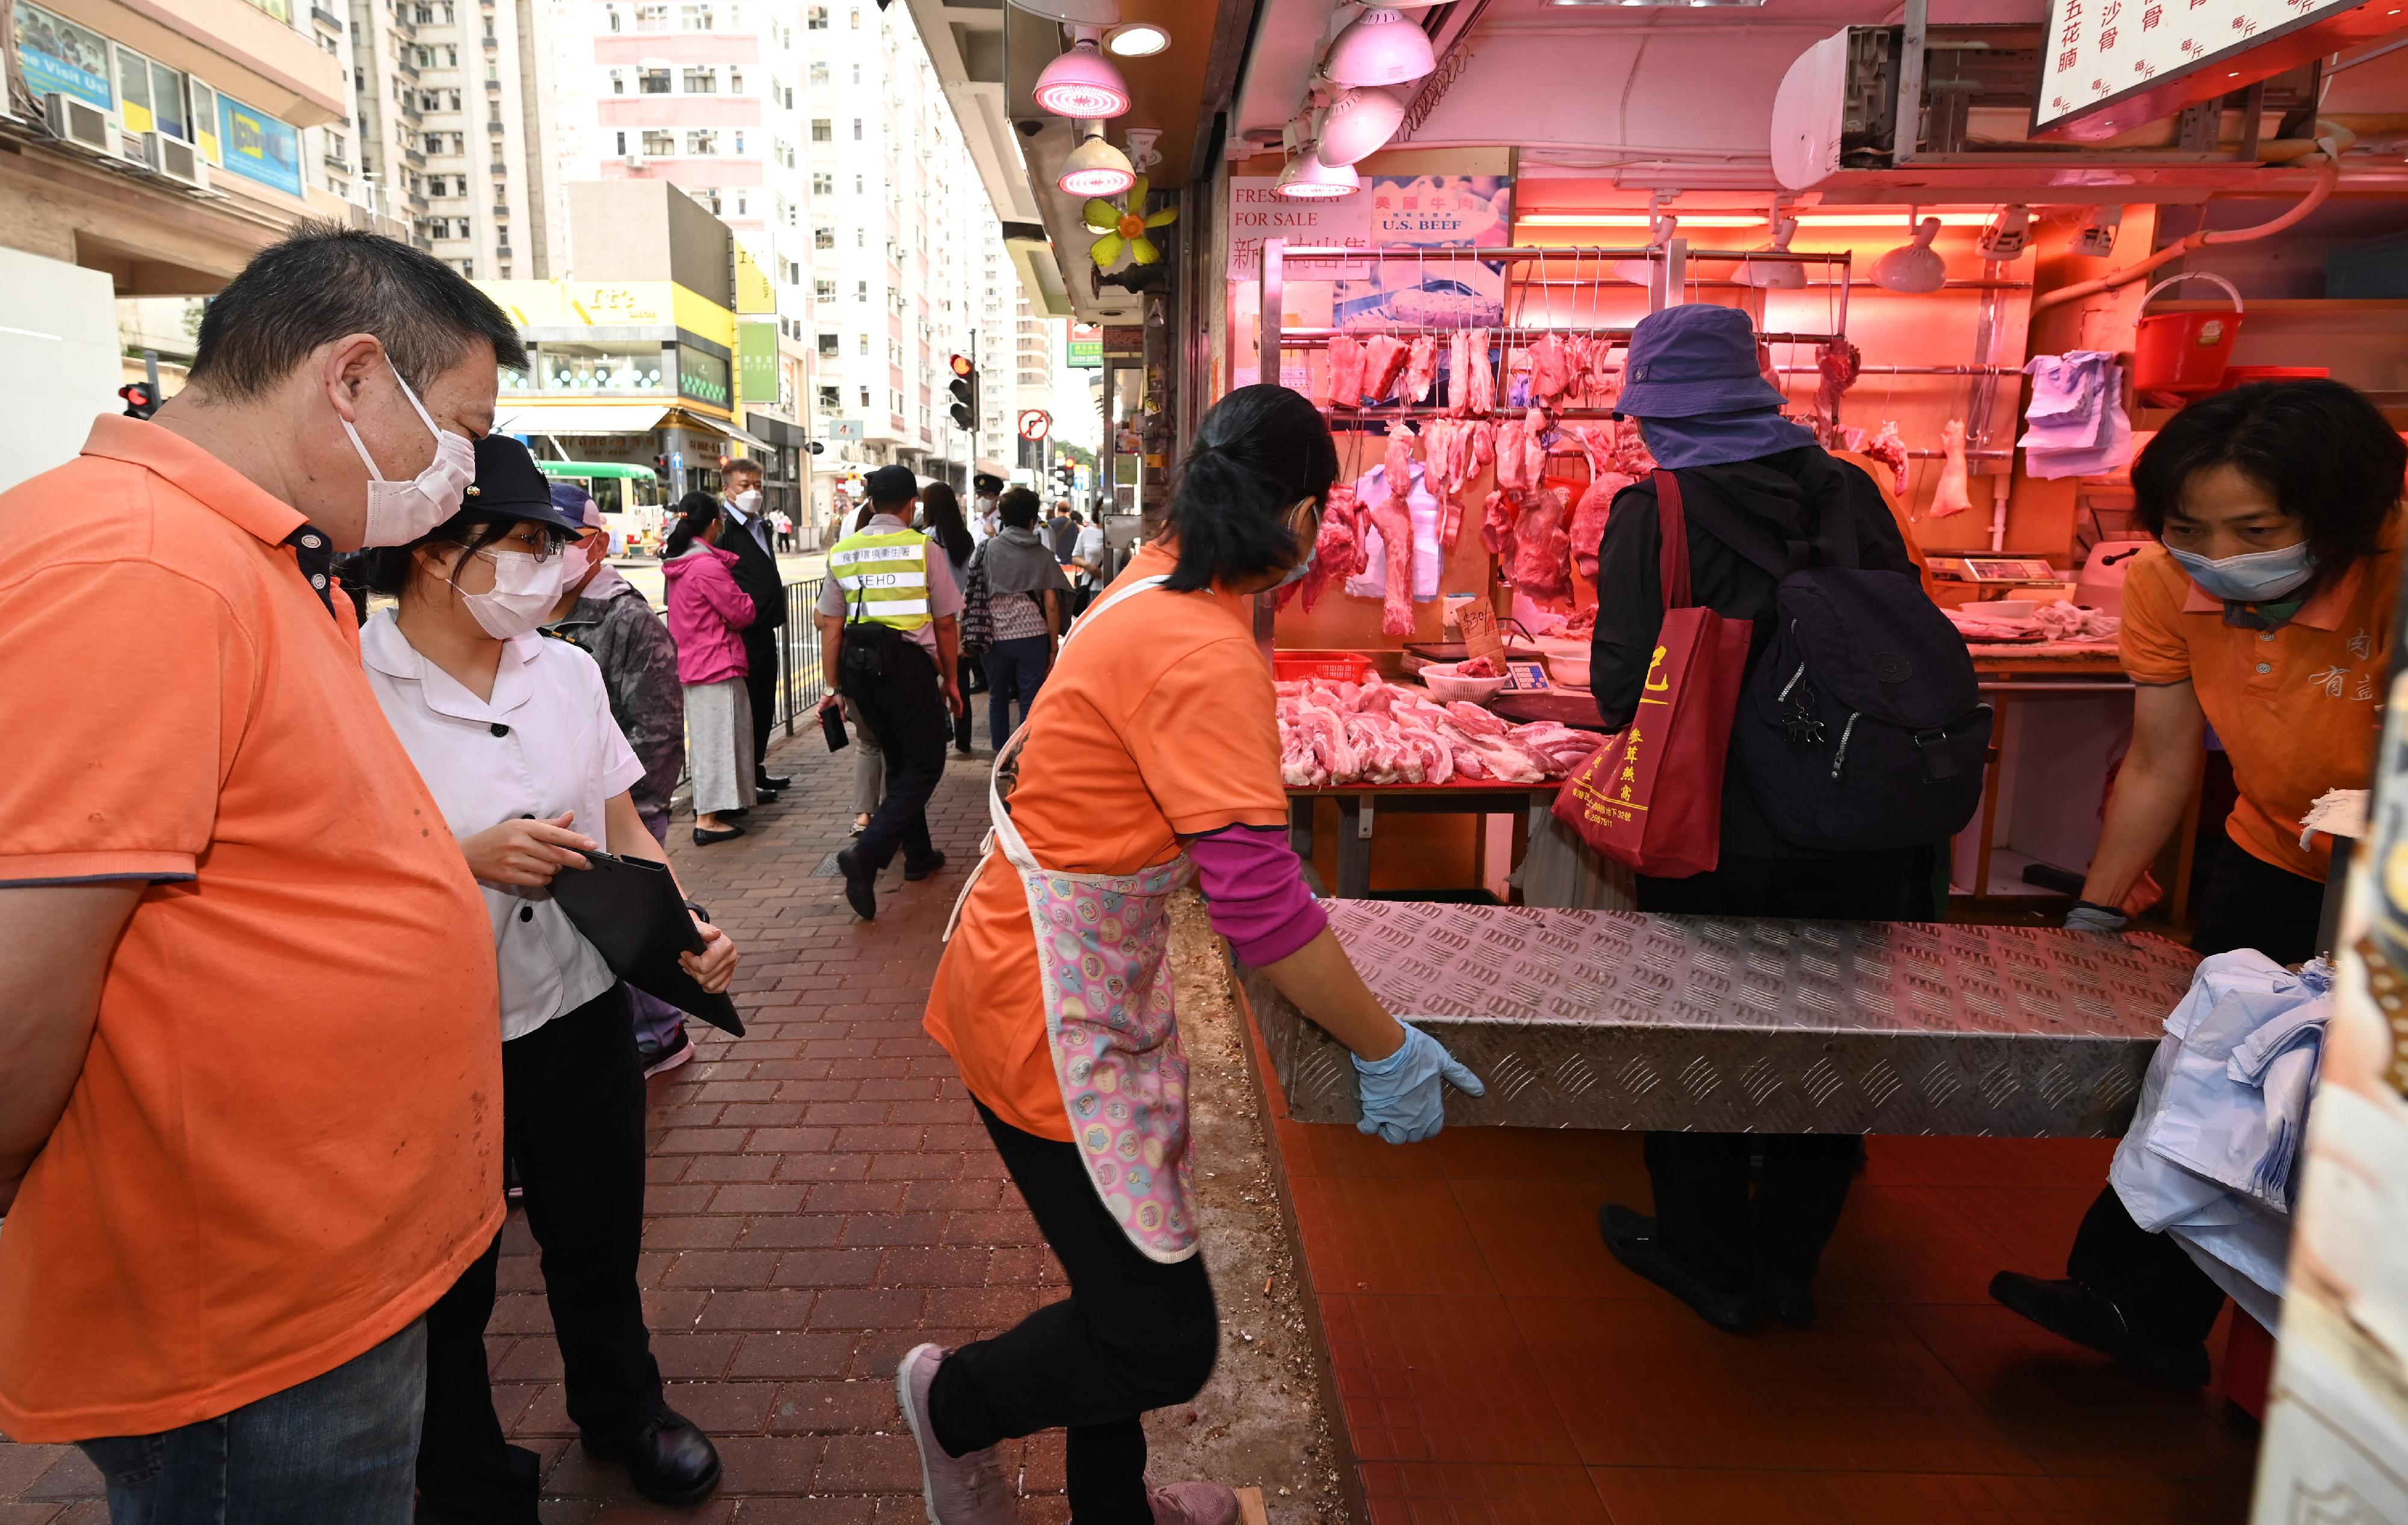 A spokesman for the Food and Environmental Hygiene Department (FEHD) said today (October 24) that the FEHD and the Hong Kong Police Force have conducted a series of stringent enforcement actions against illegal shop front extension activities in various districts since October 3. Photo shows officers of the FEHD conducting an operation in the Central and Western district earlier.